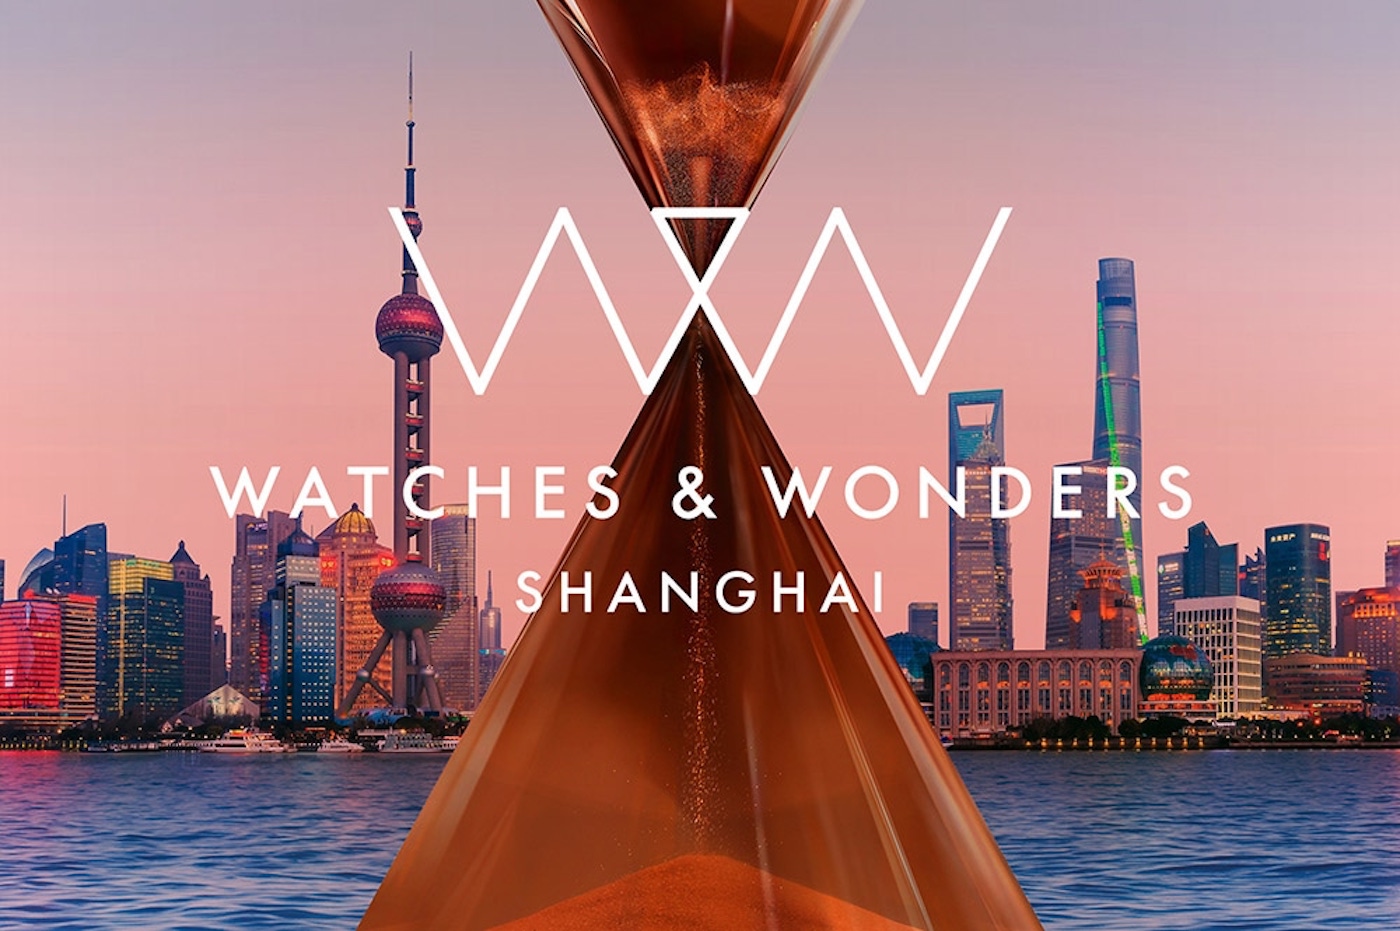 Watches & Wonders Shanghai Exhibition To Be Held September 9th to 13th, 2020